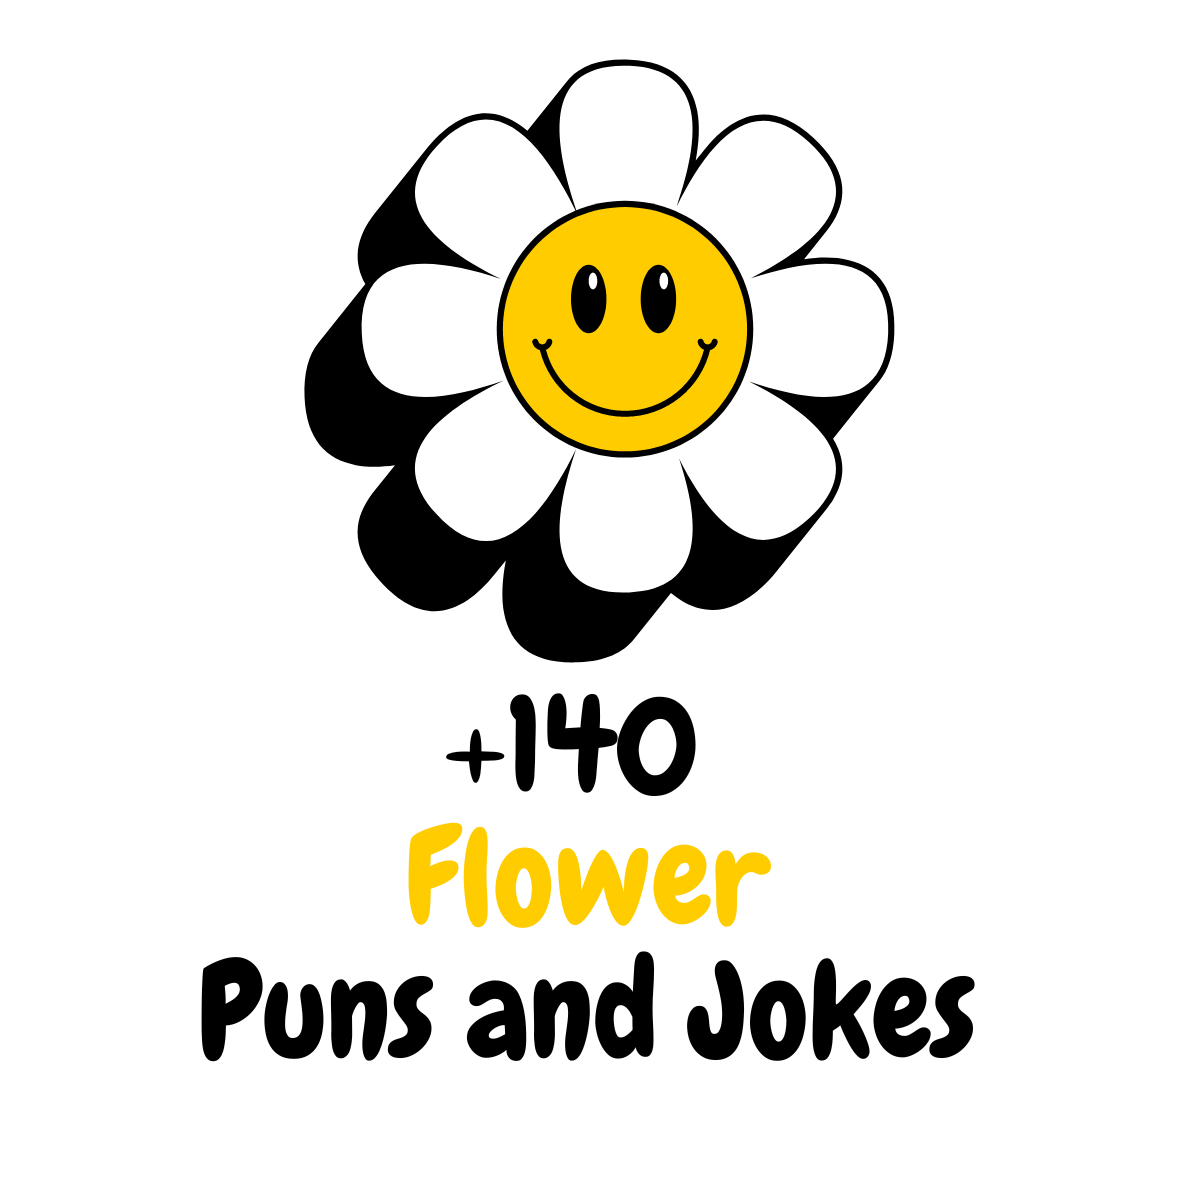 +140 Funny Flower Puns and Jokes to Make You Bloom